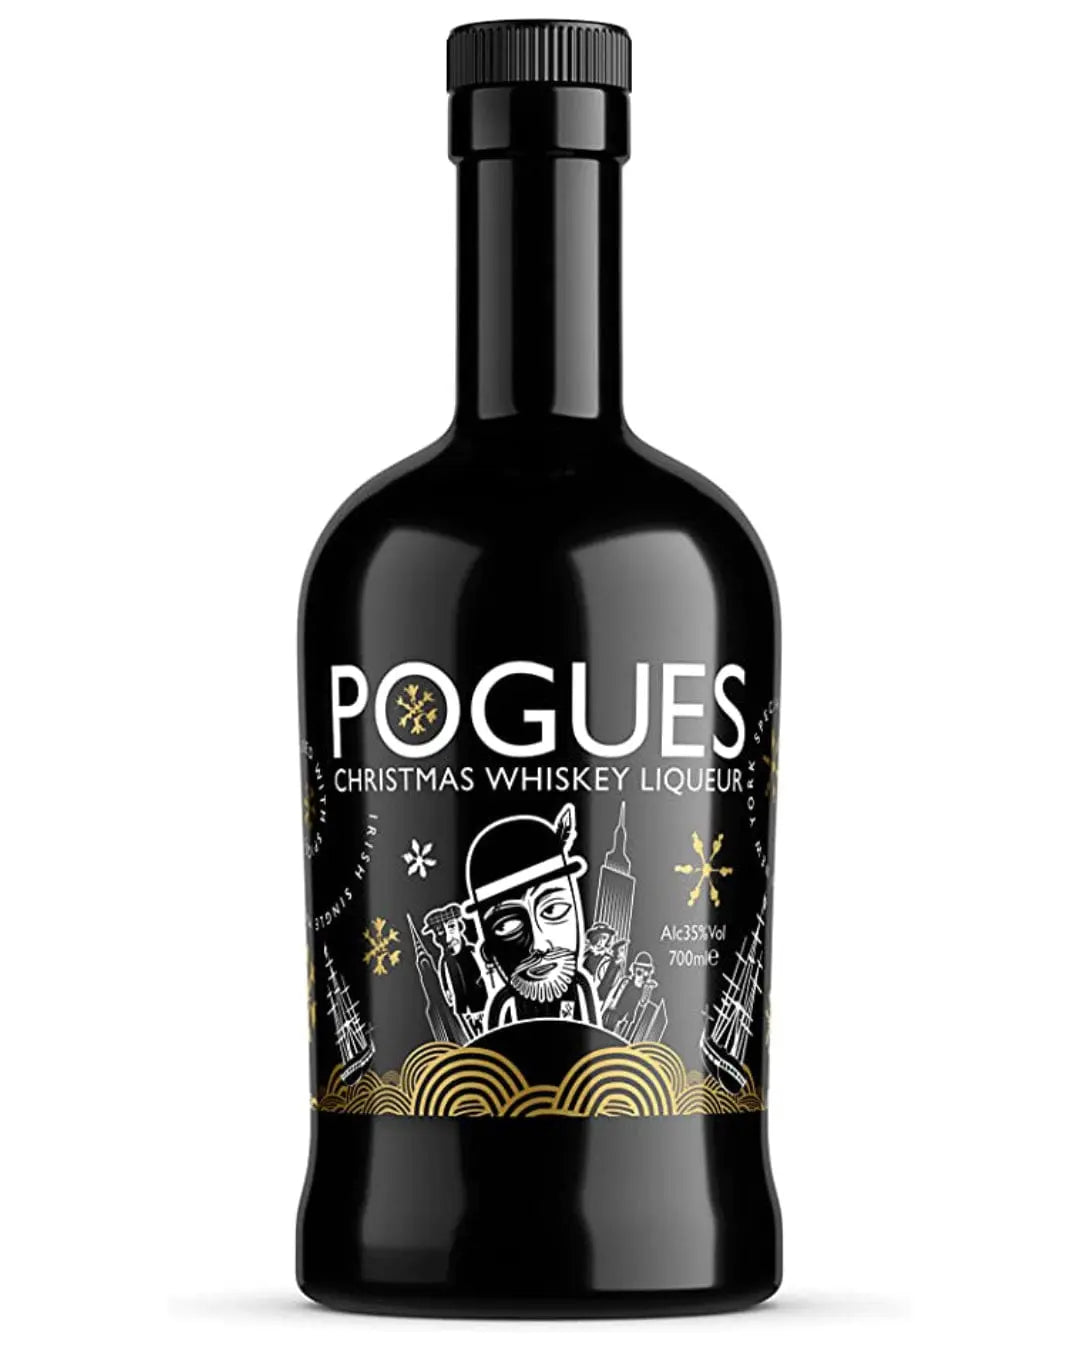 The Pogues Christmas Whiskey Liqueur, 70 cl Whisky